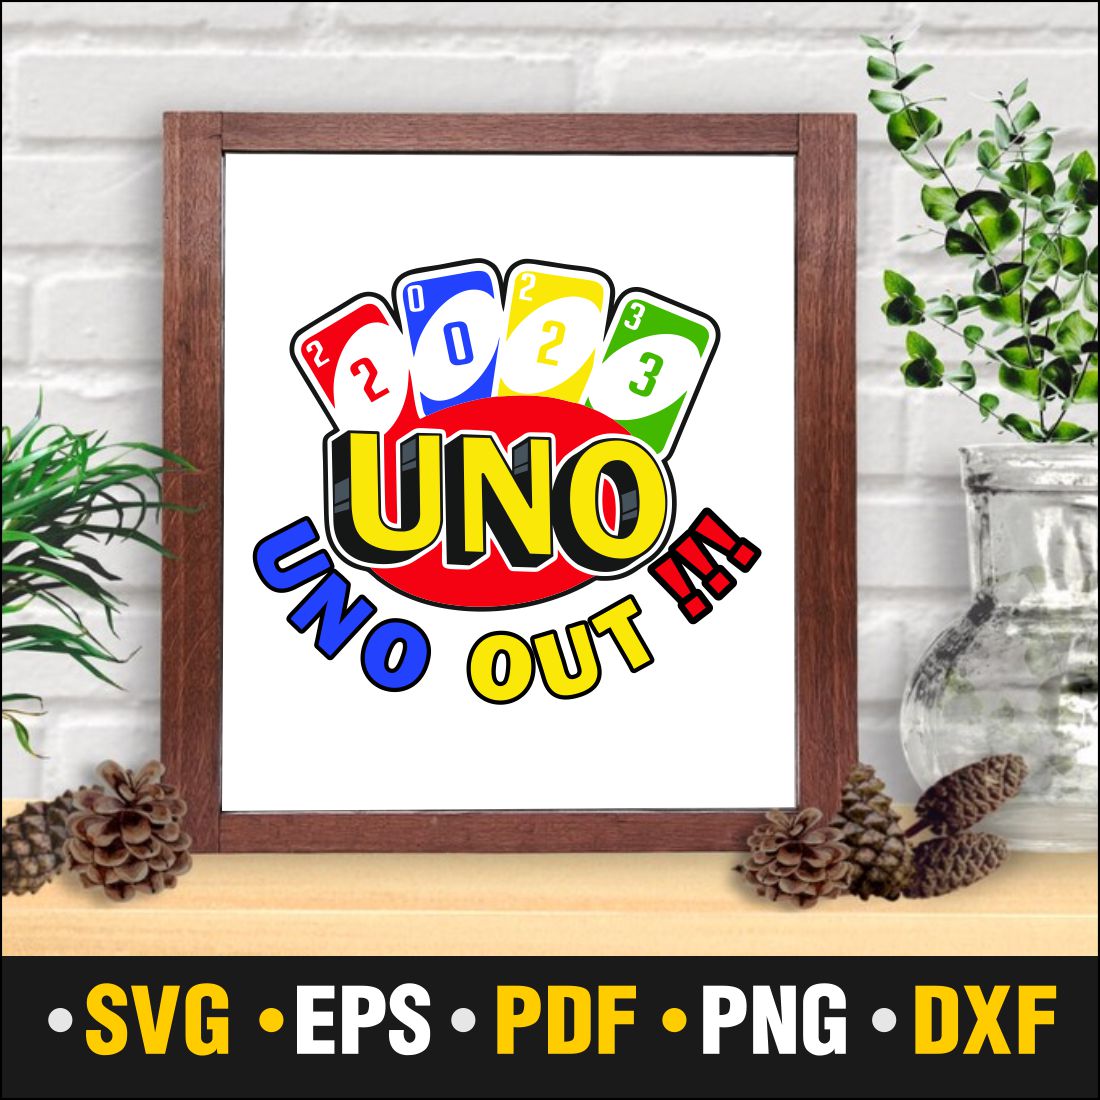 2023 Uno Out Svg, 2023 Uno Out, Vector Cut file Cricut, Silhouette, Uno Sublimation, 2023 Uno Out Png preview image.